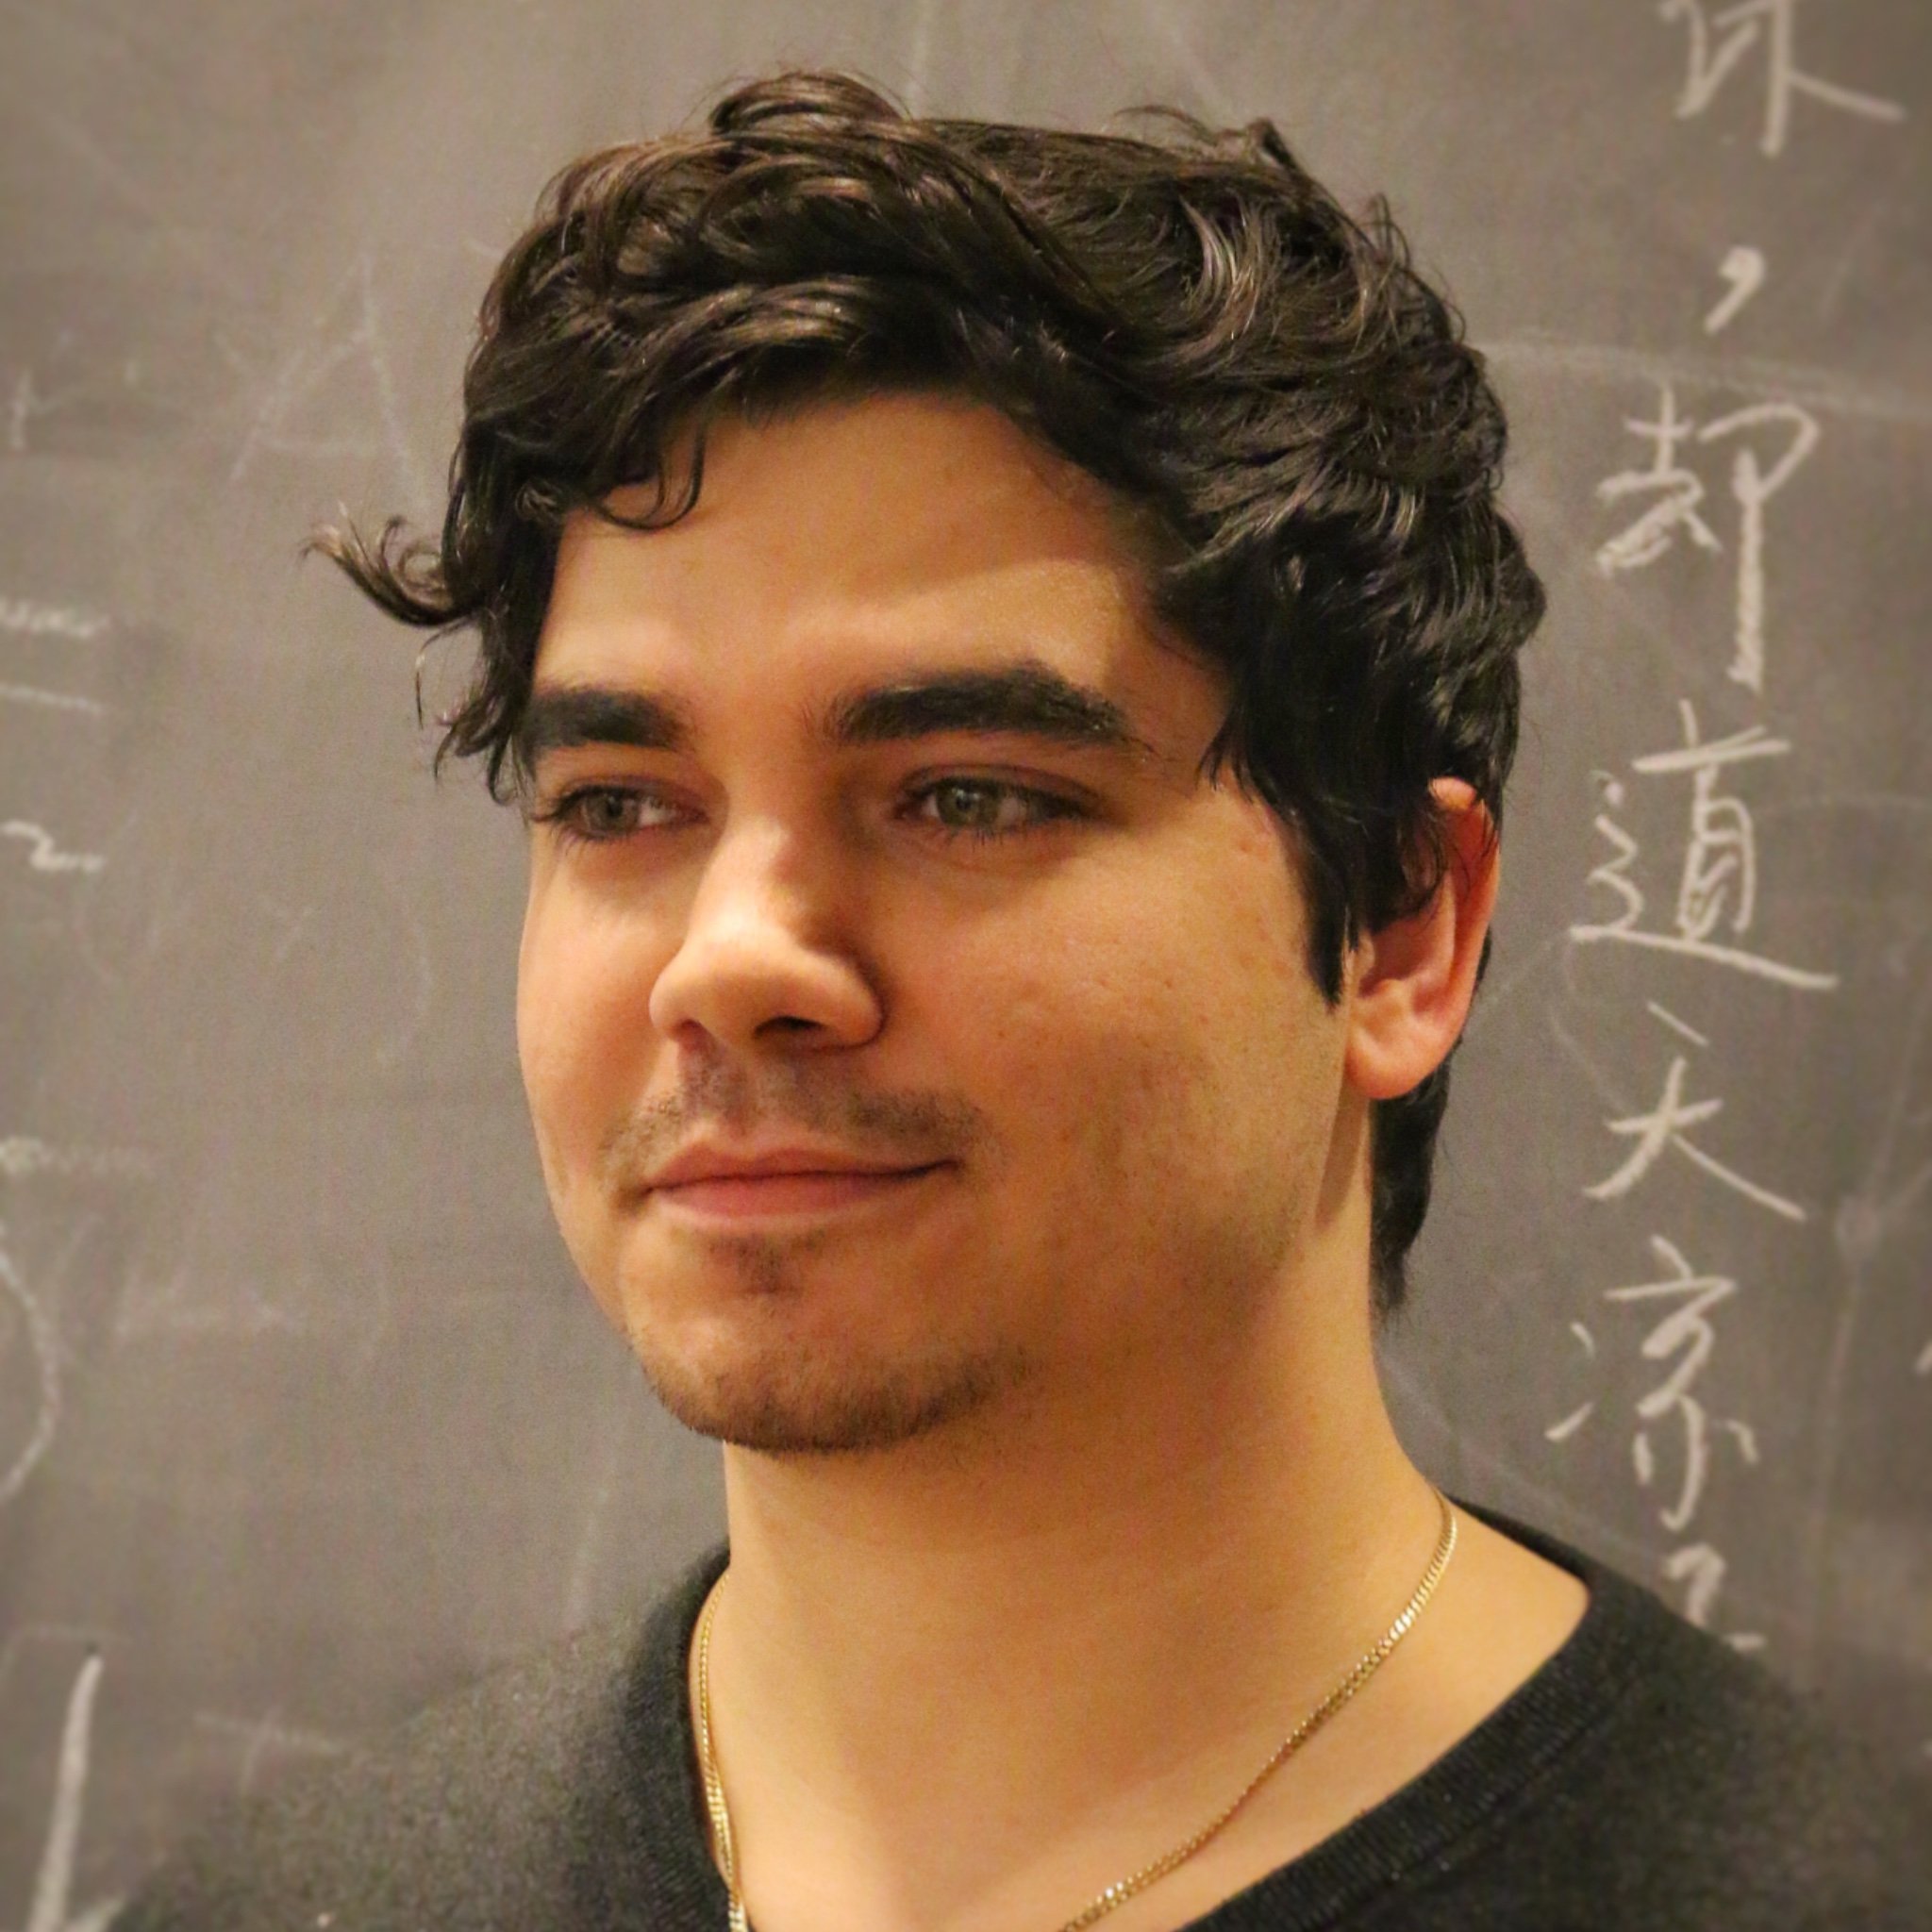 Astrophysics PhD candidate @MIT studying AGN feedback in galaxy clusters | @NASA #FINESST | he/him 🔭 ✨🇨🇺